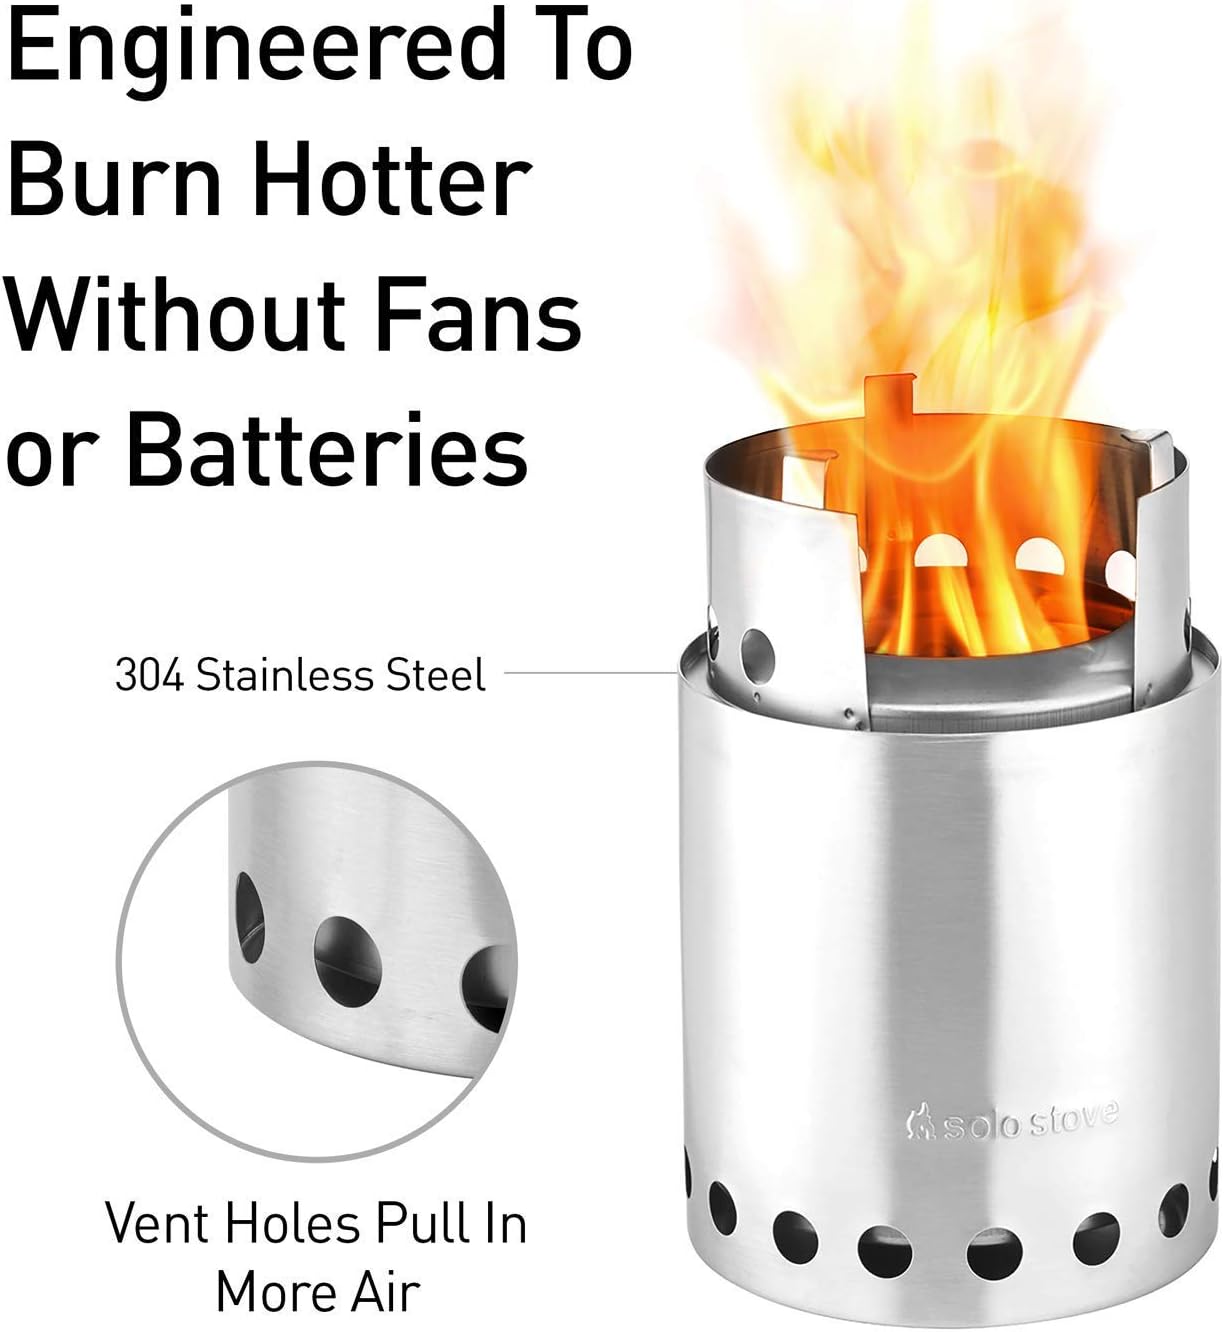 Solo Stove Titan Camping Stove Portable Stove for Backpacking and Outdoor Cooking Great Stainless Steel Camping Backpacking Stove Compact Wood Stove Design-No Batteries or Liquid Fuel Canisters Needed